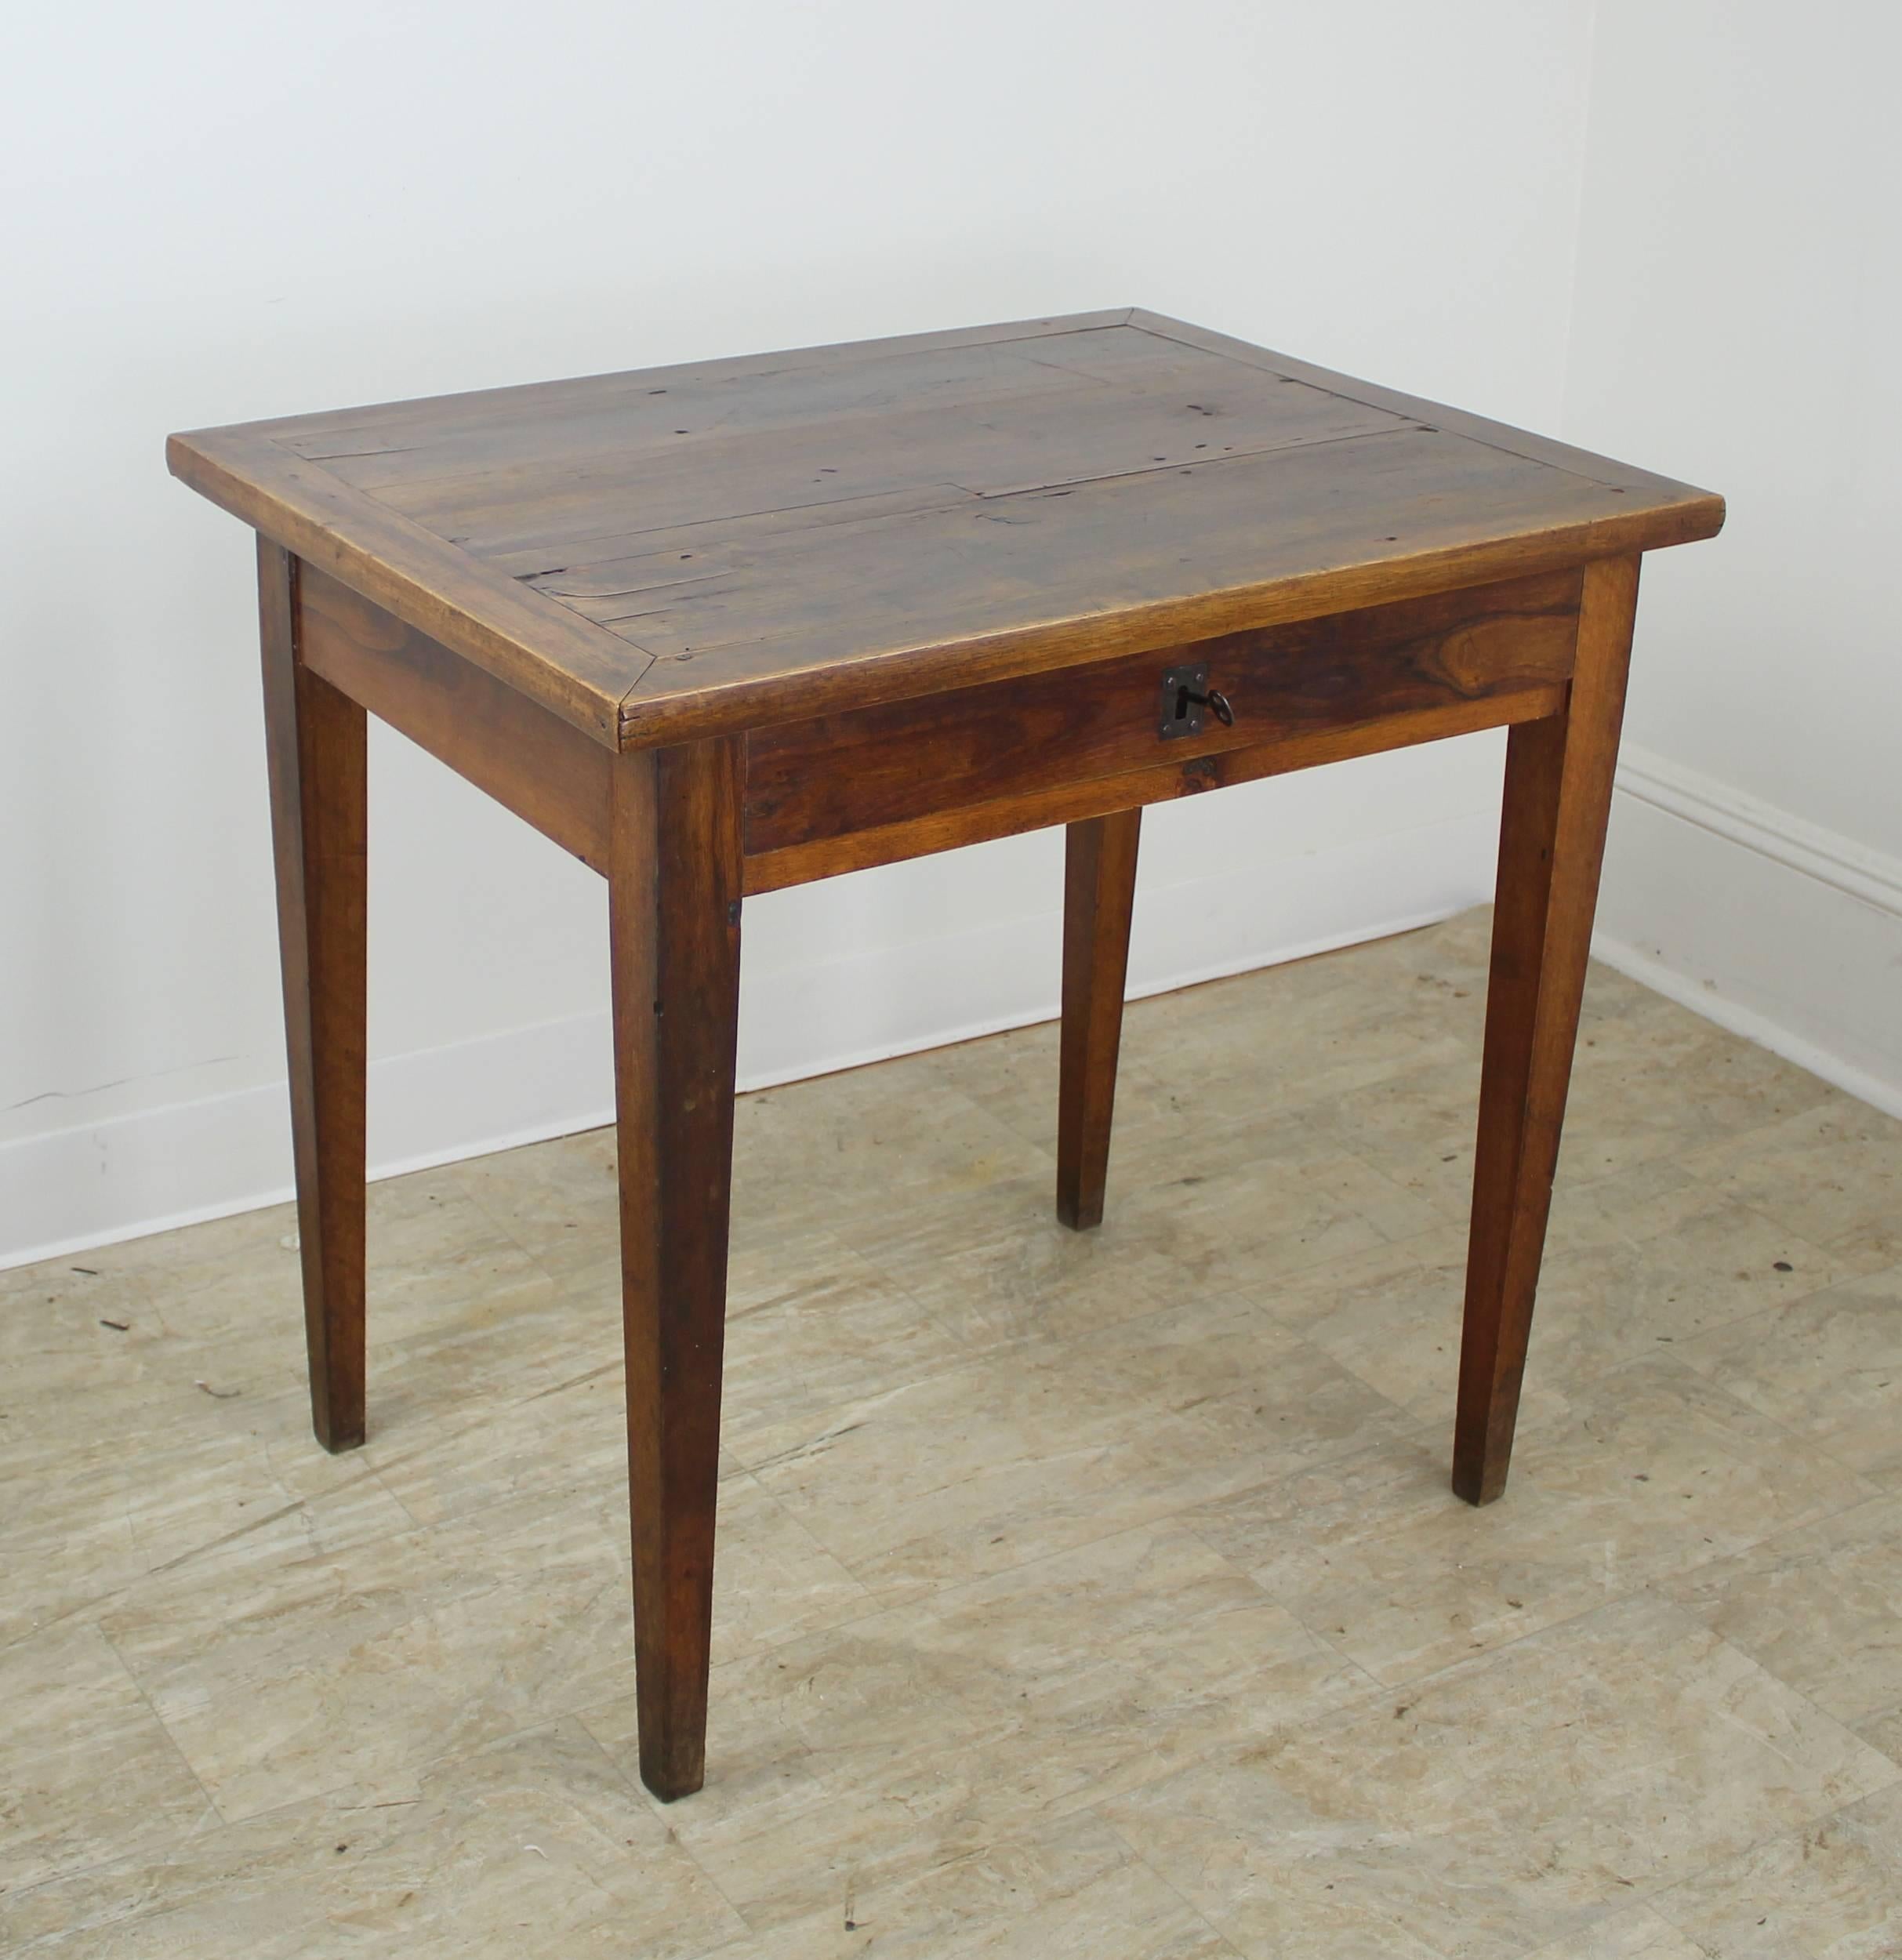 An elegant walnut side table with mitered corners on top, creating an interesting play of textures. Single drawer and long tapered legs. Beautiful patina and dramatic walnut grain. The large brass keyhole on the drawer has a working lock which adds